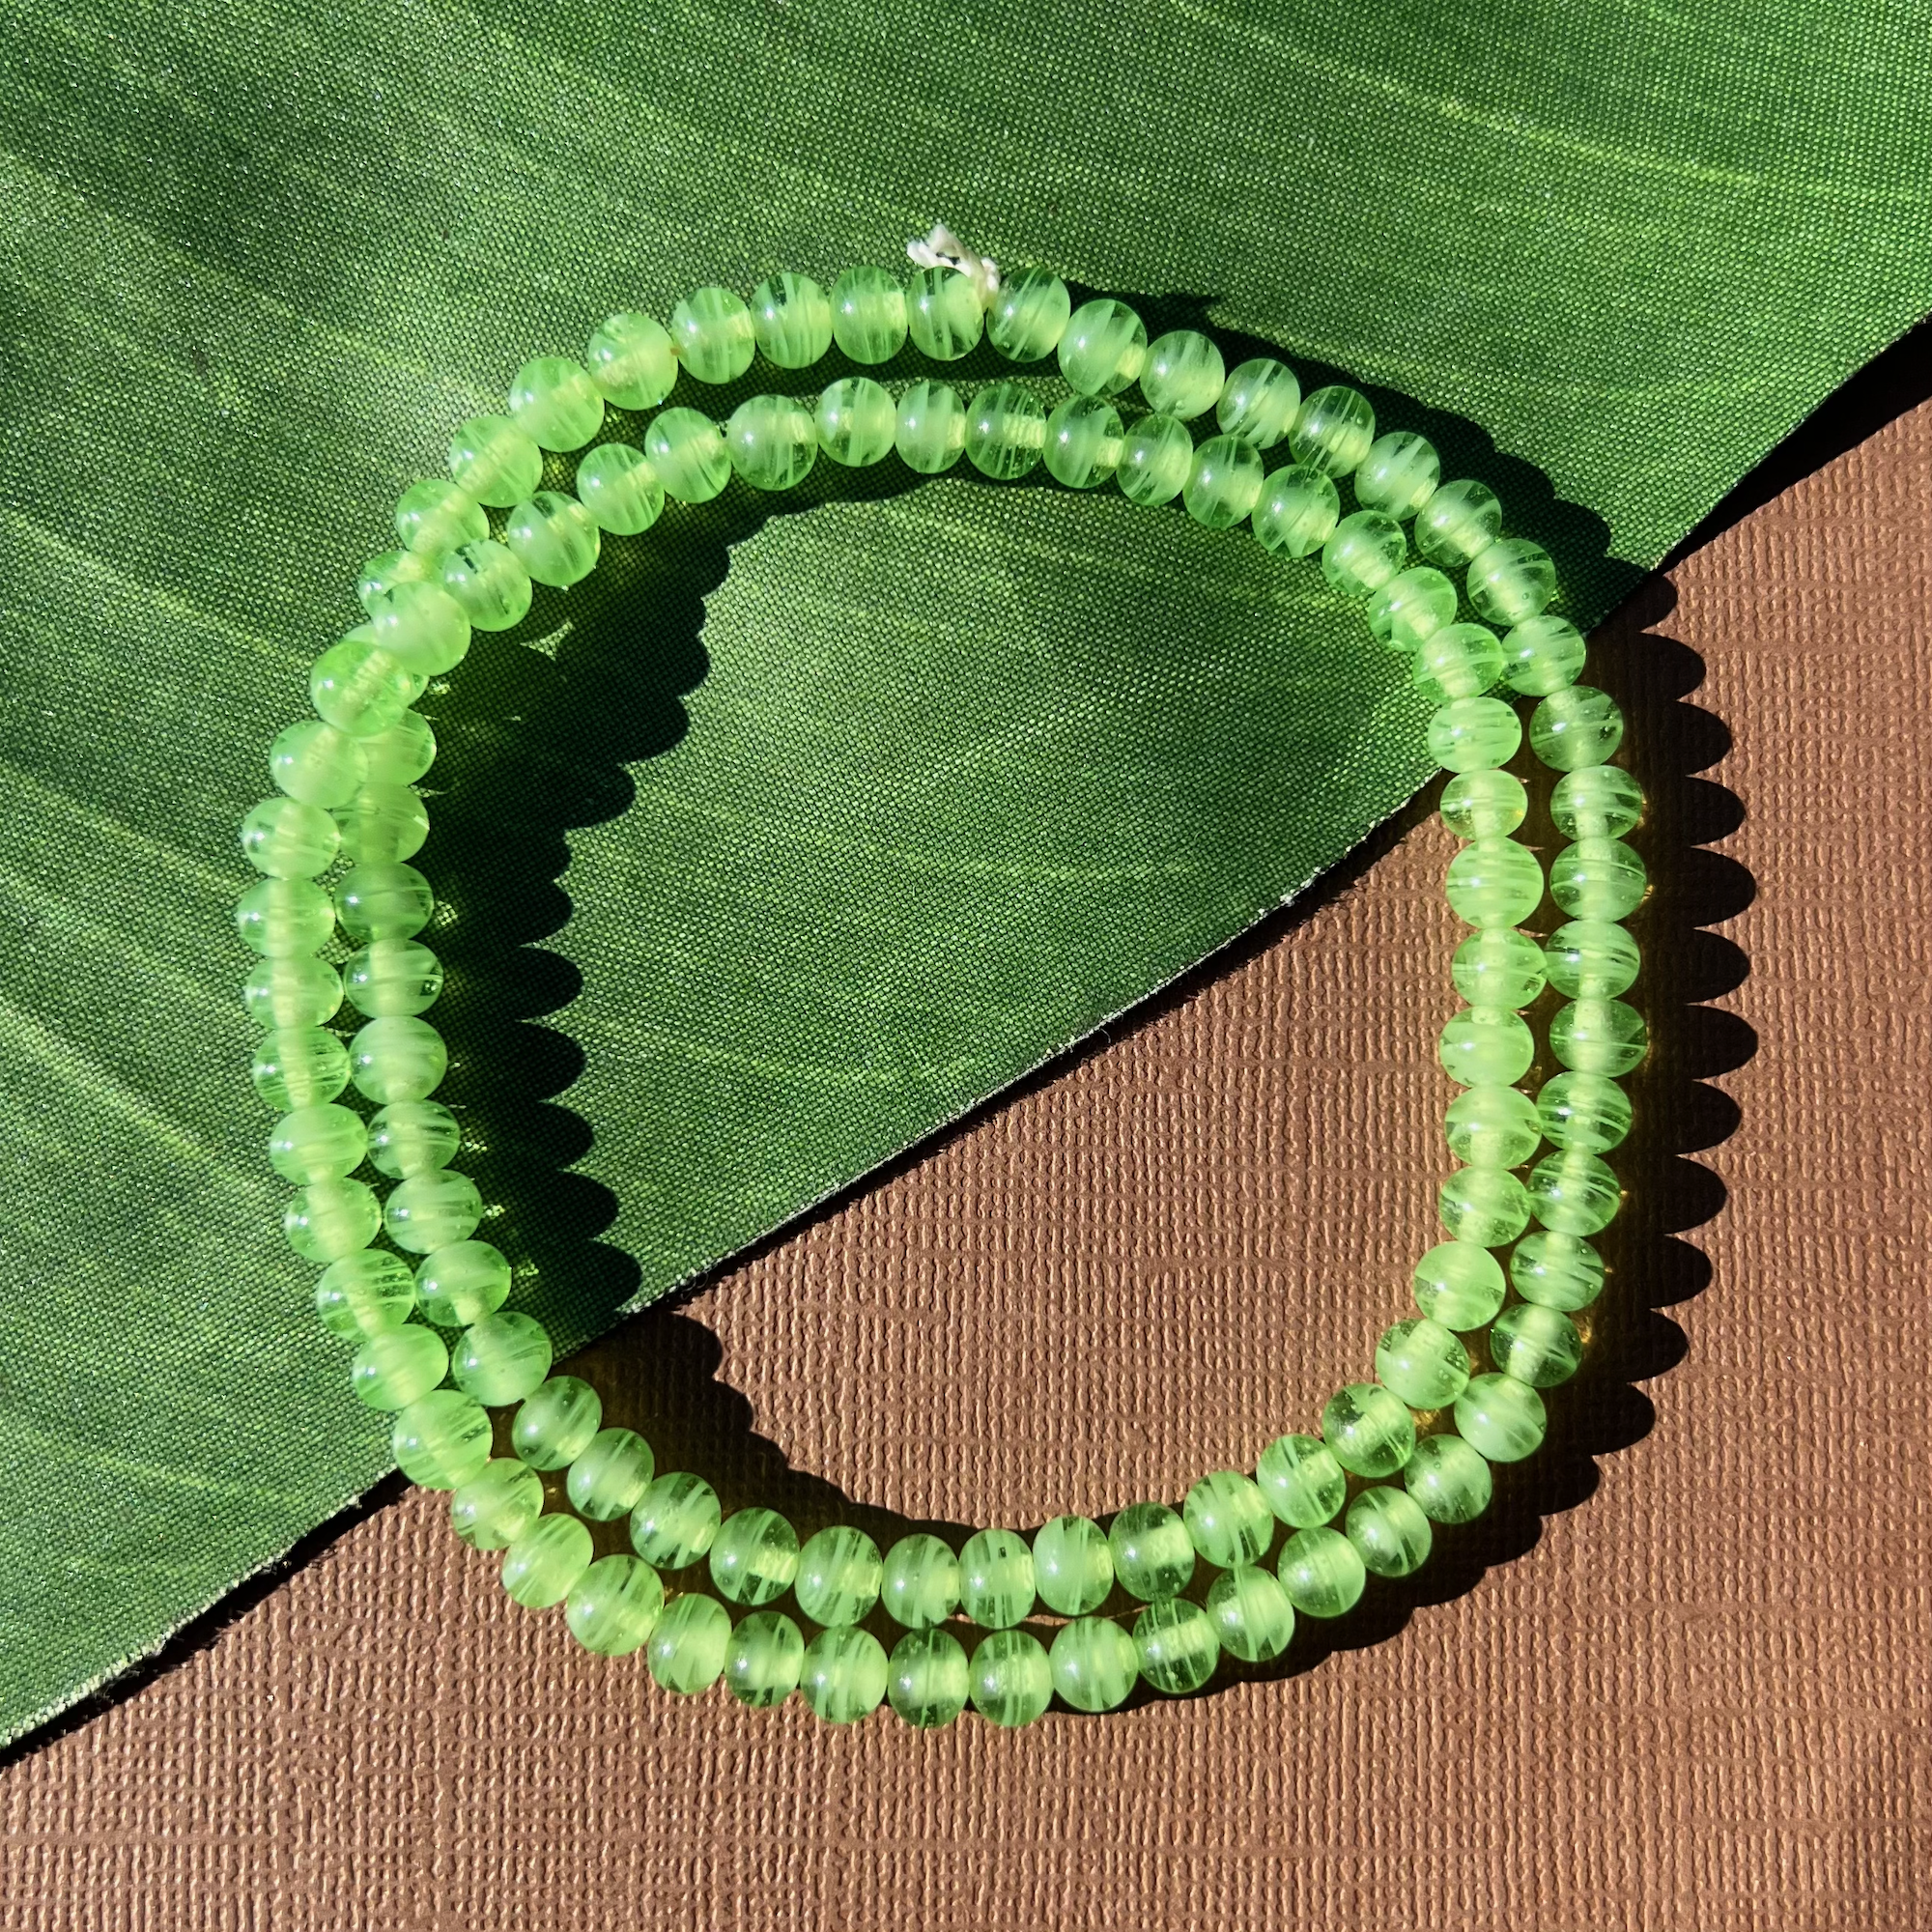 Green Round 5.5mm Beads - 100 Pieces